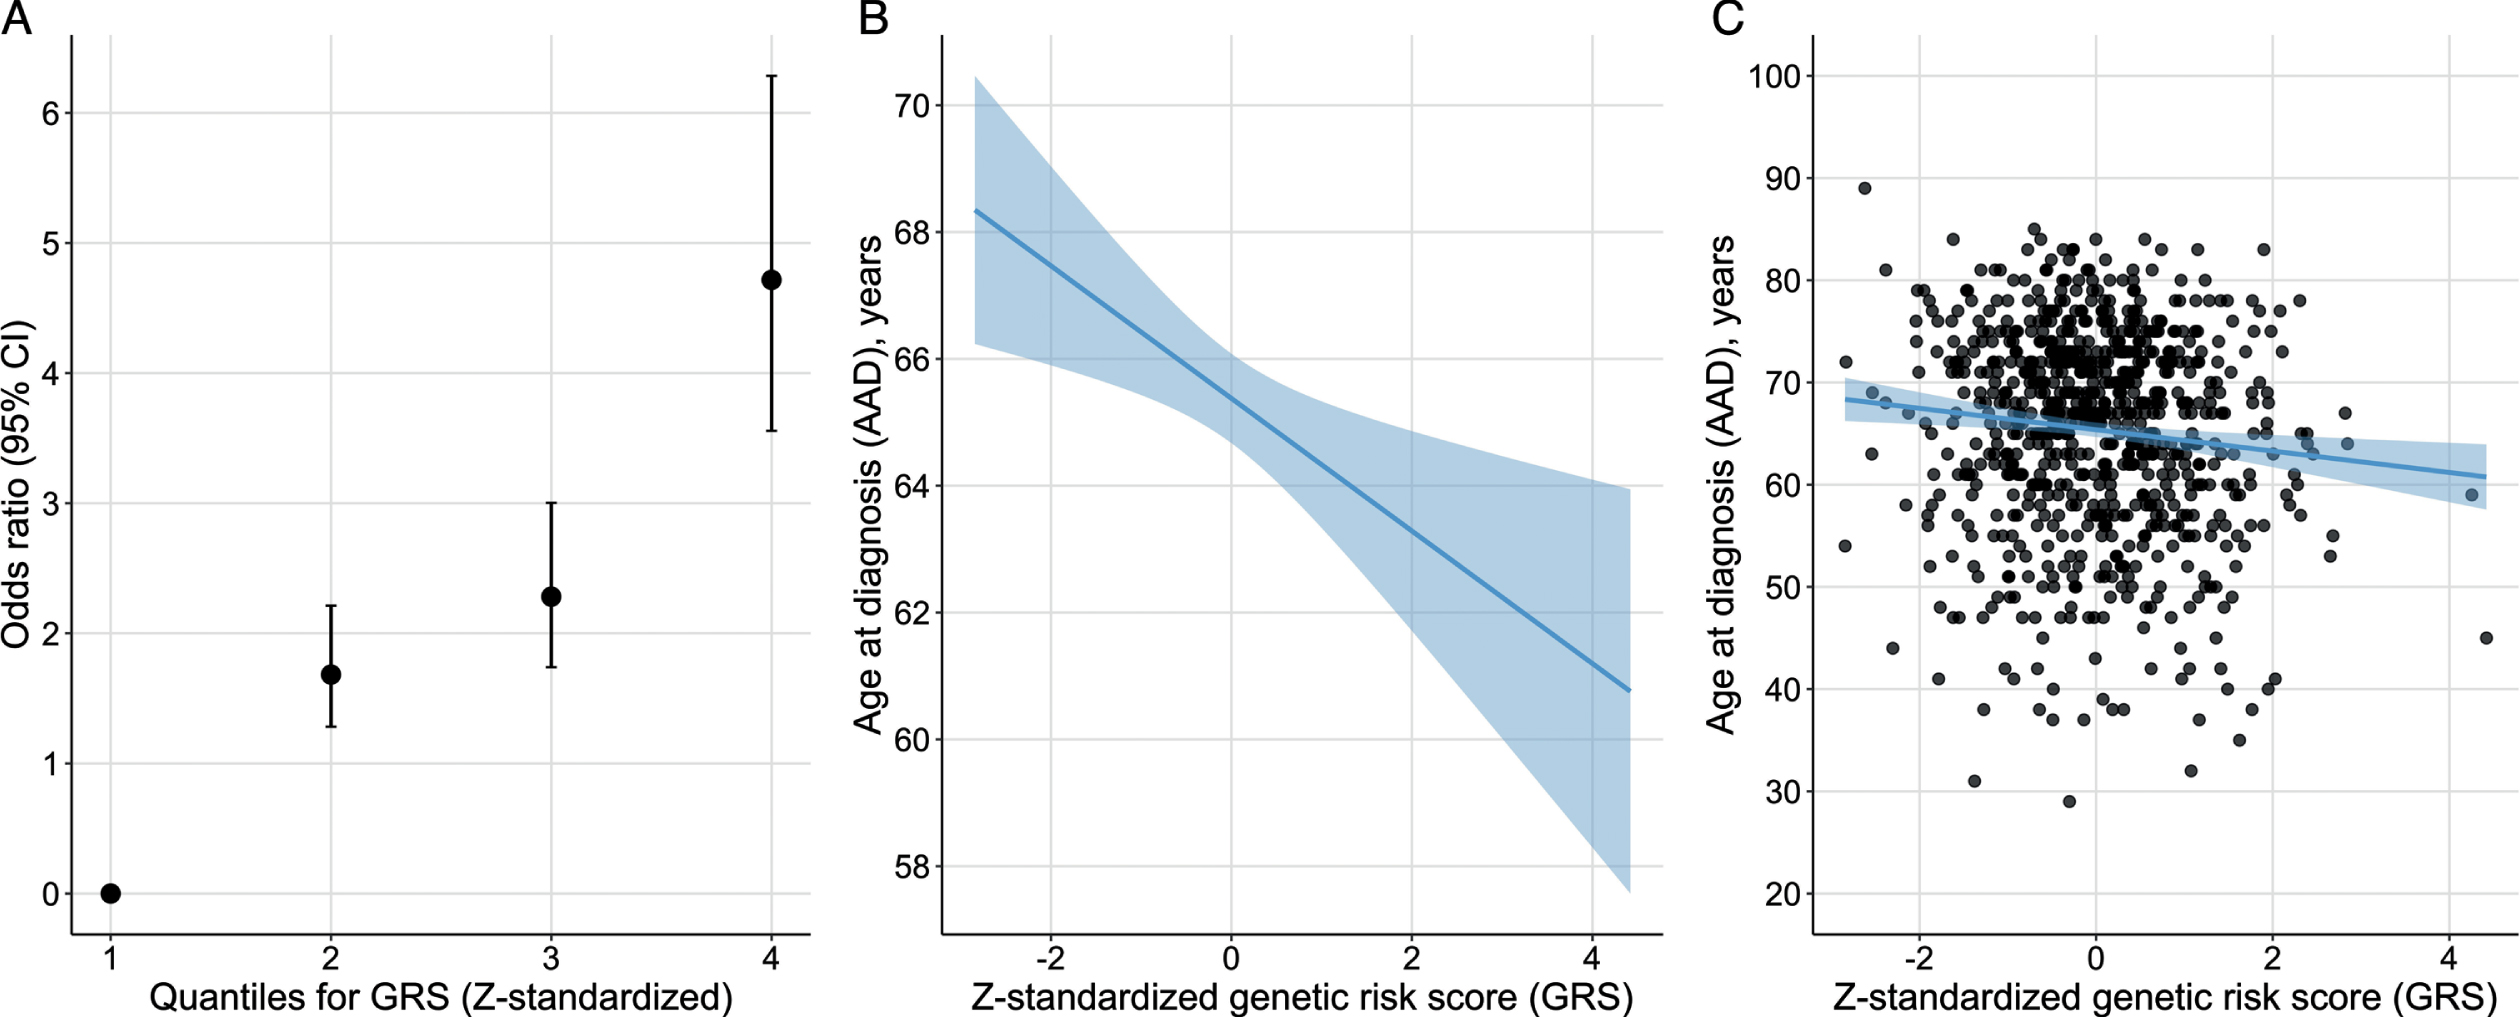 Genetic risk score (GRS) quartiles vs. disease status (A) and age at diagnosis (AAD) (B and C). A) Odds ratio of PD status per risk quartile of the Z-standardized GRS. B) Regression line for the association between the Z-standardized GRS and AAD. The line represents the parameter estimate and the shading the 95% CI of the regression model. The model was adjusted for sex, PD family history, and PC1-5. C) AAD and Z-standardized GRS for each study participant with the regression model in plot B fitted to the plot.